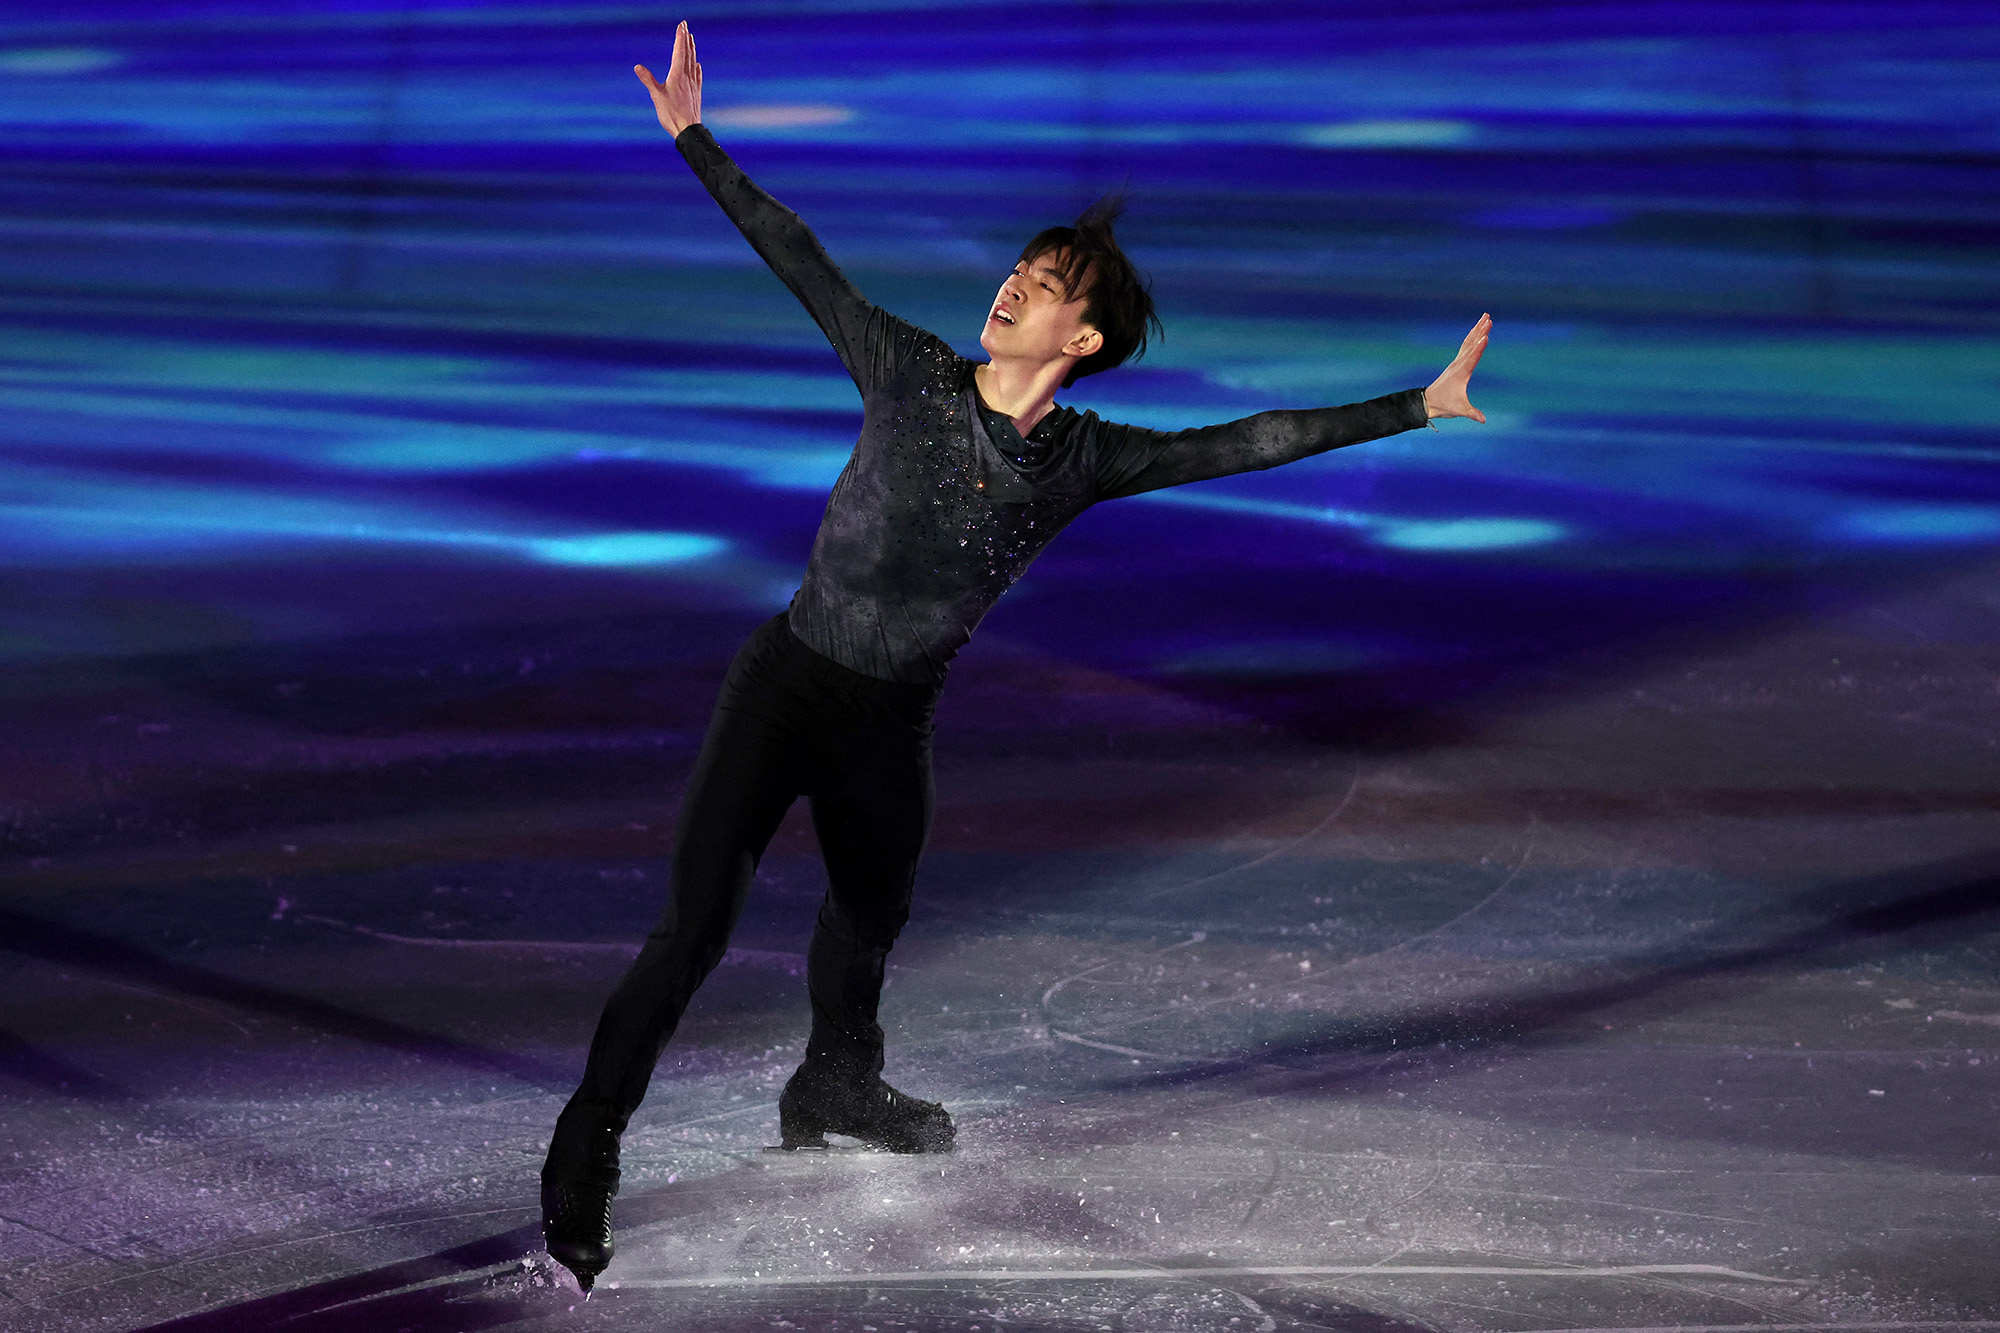 Vincent Zhou, Excluded from closing ceremony, Olympic disappointment, Unfortunate circumstance, 2000x1340 HD Desktop